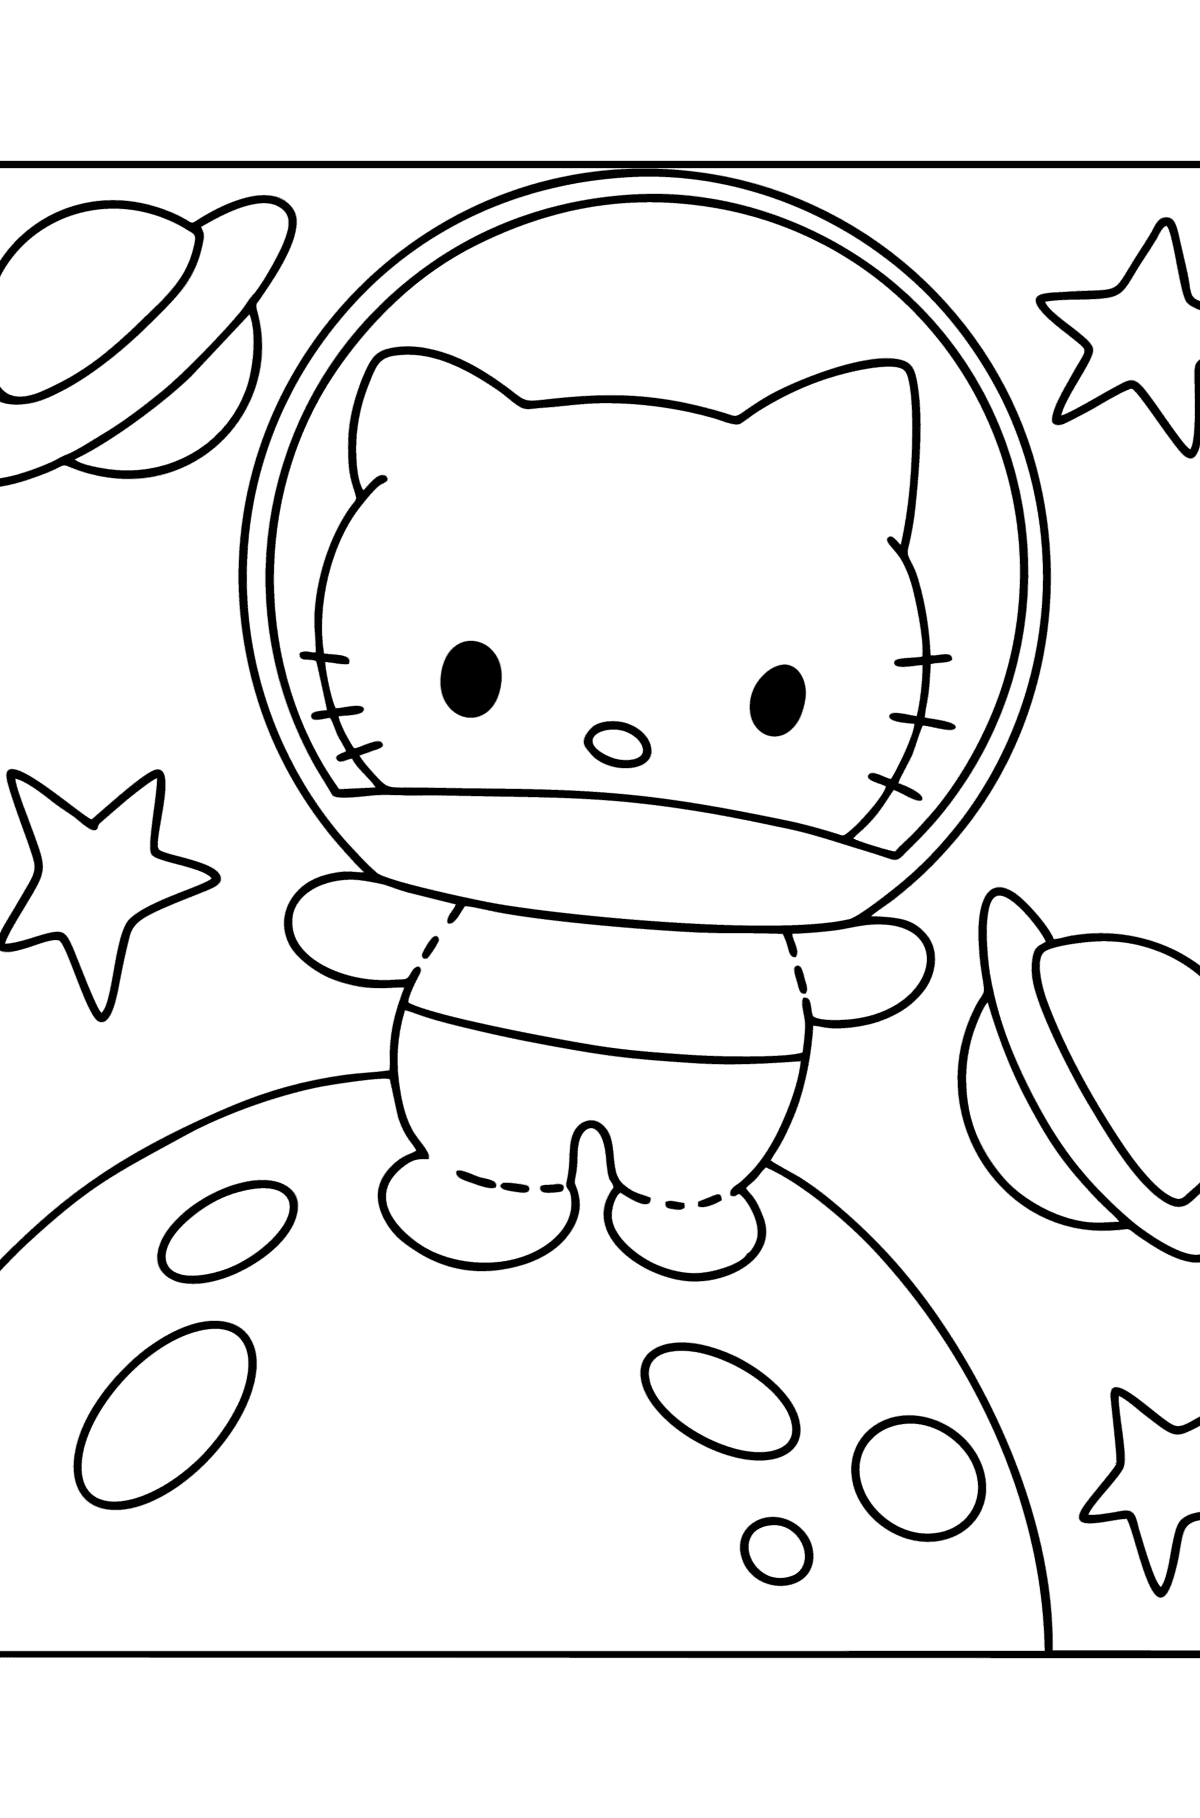 Hello Kitty Astronaut coloring page - Coloring Pages for Kids